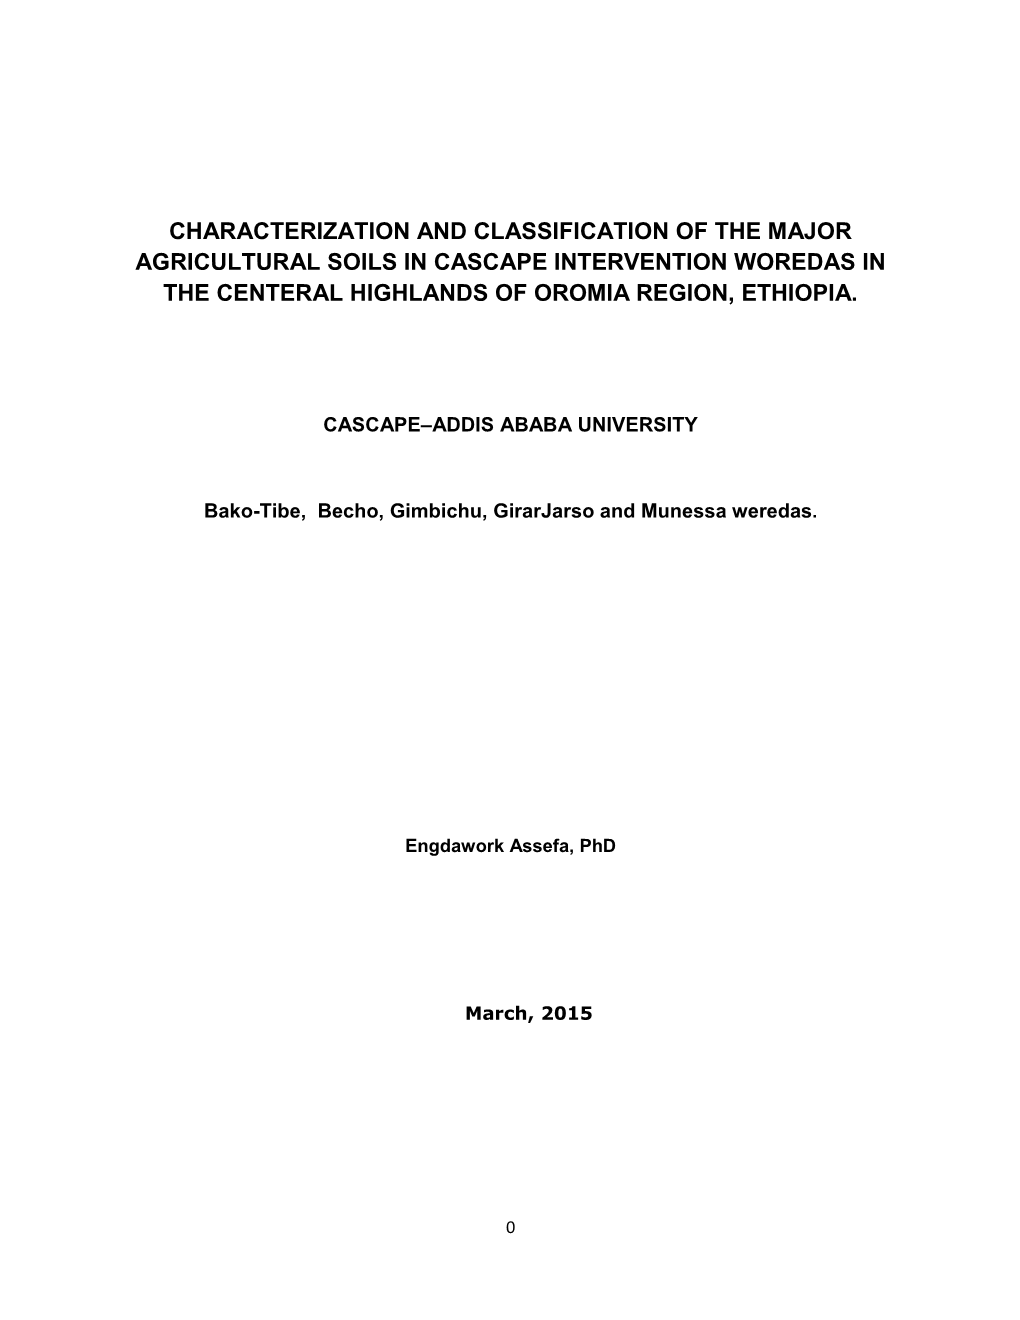 Characterization and Classification of the Major Agricultural Soils in Cascape Intervention Woredas in the Centeral Highlands of Oromia Region, Ethiopia